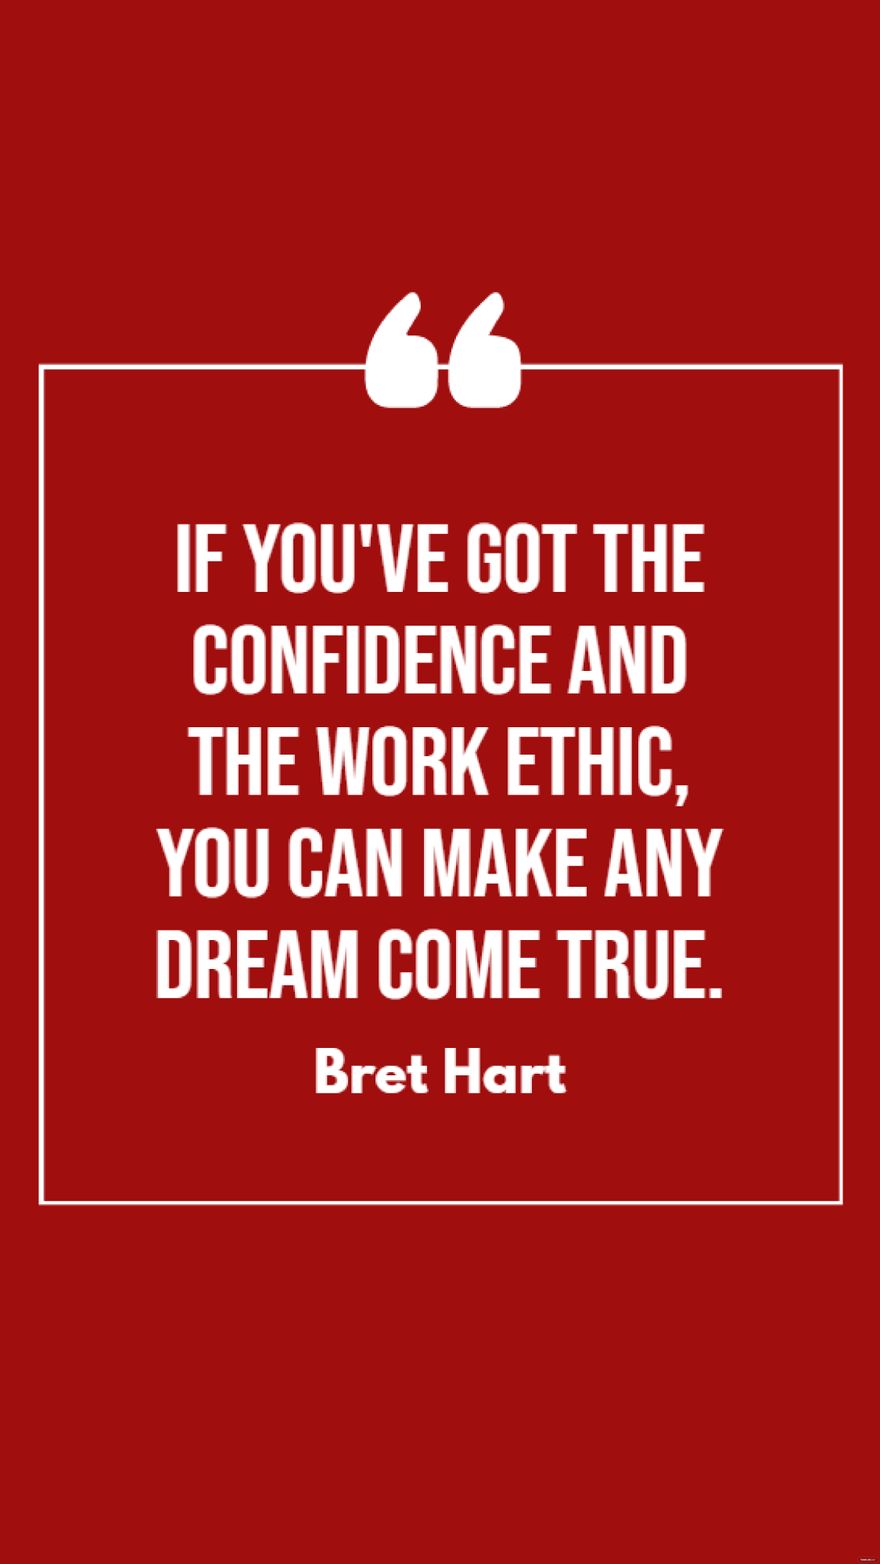 Bret Hart - If you've got the confidence and the work ethic, you can make any dream come true.